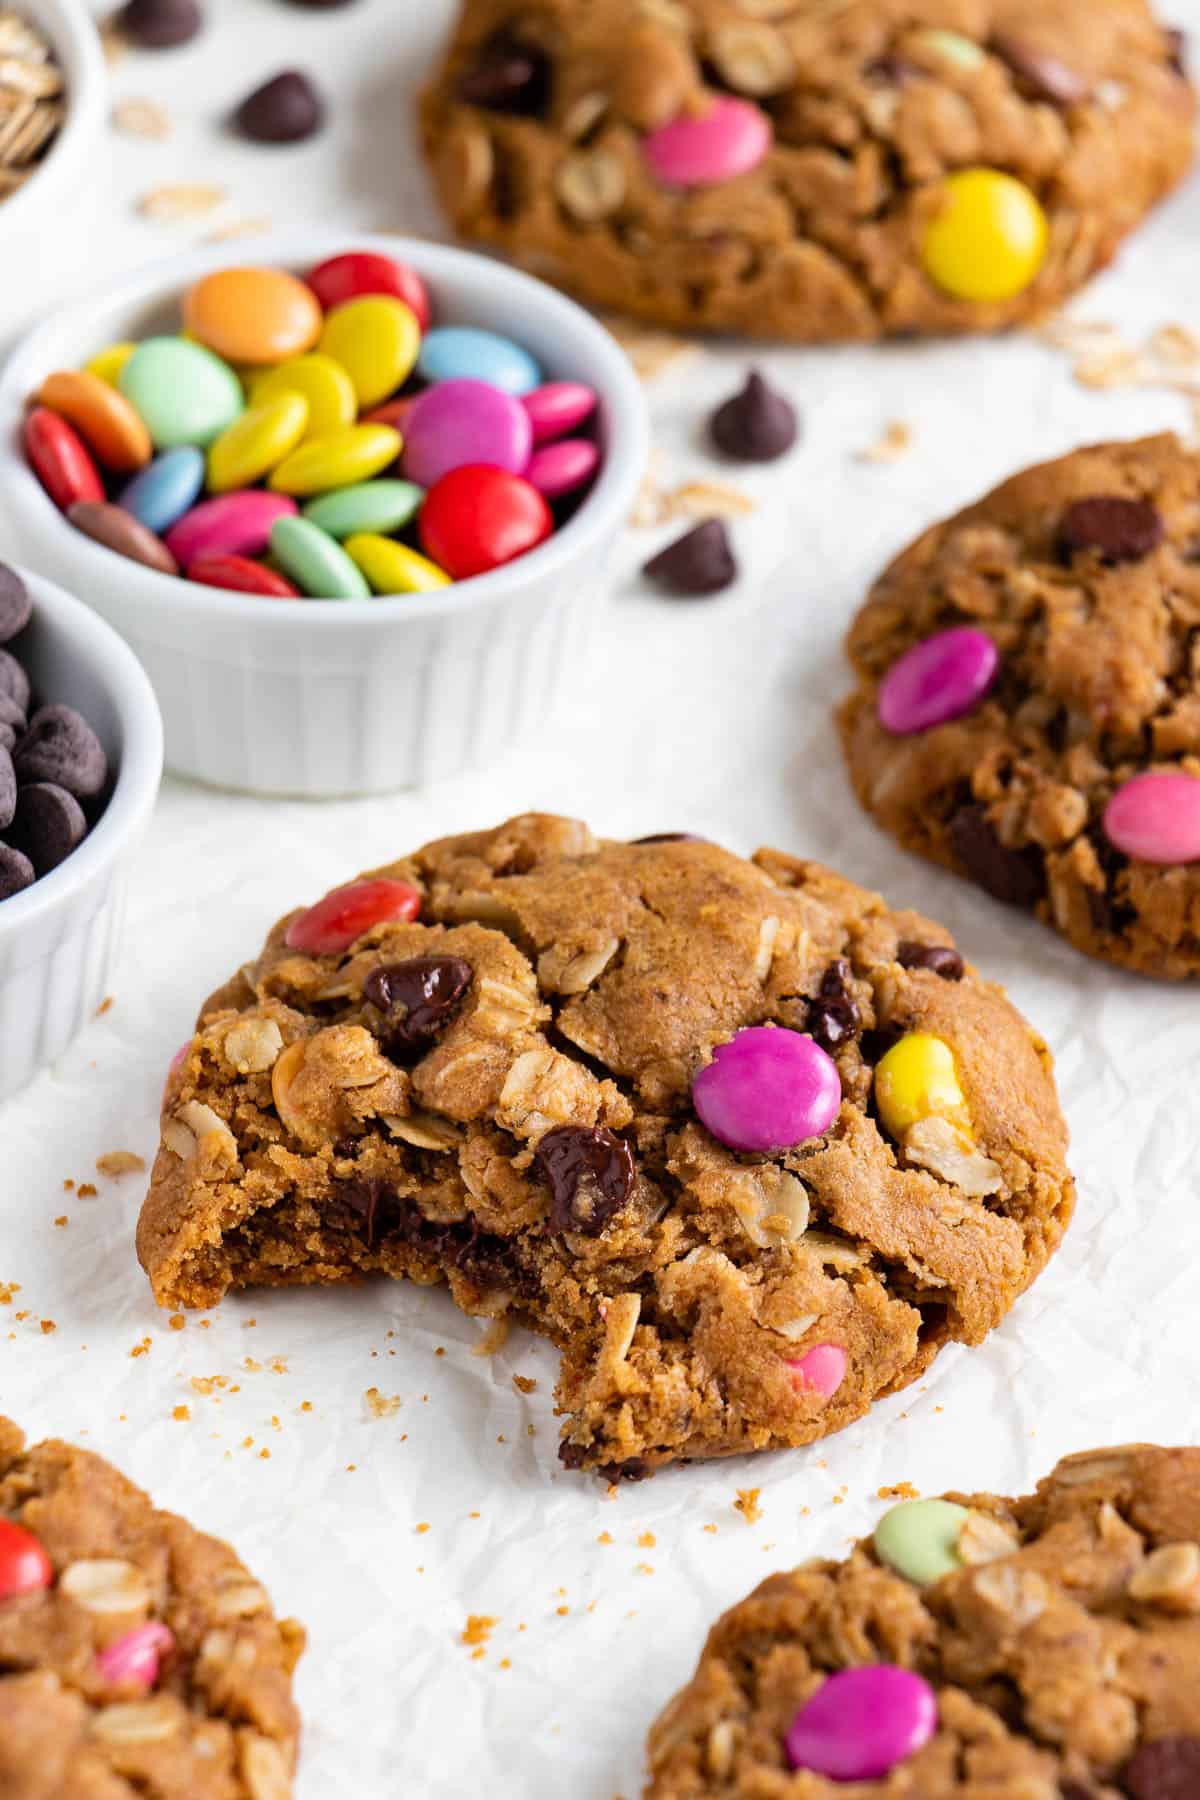 a vegan monster cookie with a bite taken out of it, surrounded by a bowl of vegan m&ms, chocolate chips, and more cookies